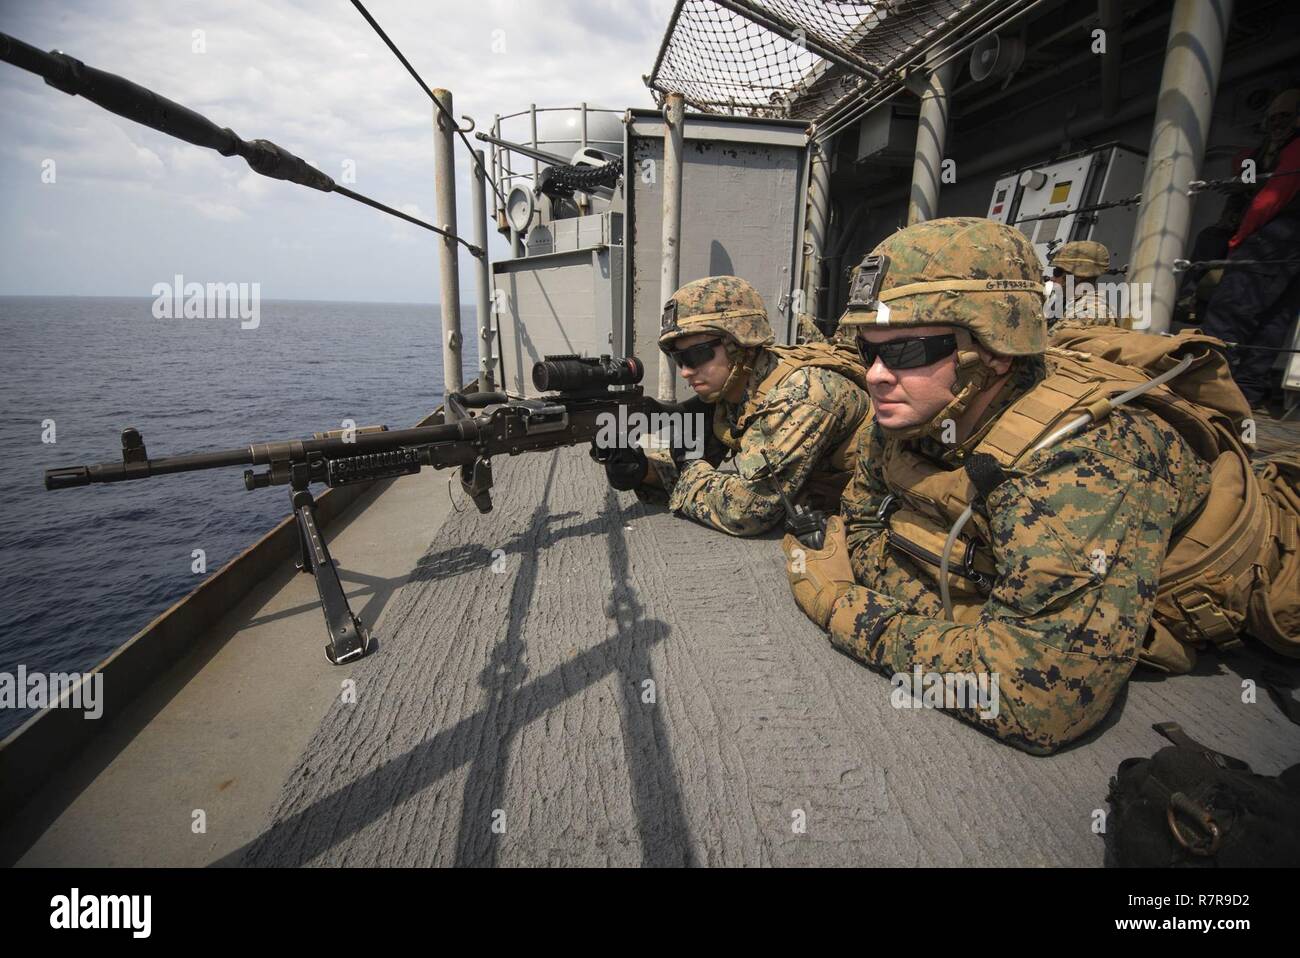 PHILIPPINE SEA (March 29, 2017) Lance Cpl. Lee Flodder, right, from Batesville, Ind., and Lance Cpl. Anthony Deherrera, from Amarillo, Texas, assigned to the 31st Marine Expeditionary Unit (MEU), man an M240B machine gun aboard the amphibious assault ship USS Bonhomme Richard (LHD 6) as part of a simulated straits transit meant to exercise U.S. Navy-Marine Corps integrated defense procedures. Bonhomme Richard, flagship of the Bonhomme Richard Expeditionary Strike Group, with embarked 31st Marine Expeditionary Unit, is on a routine patrol, operating in the Indo-Asia-Pacific region to enhance wa Stock Photo